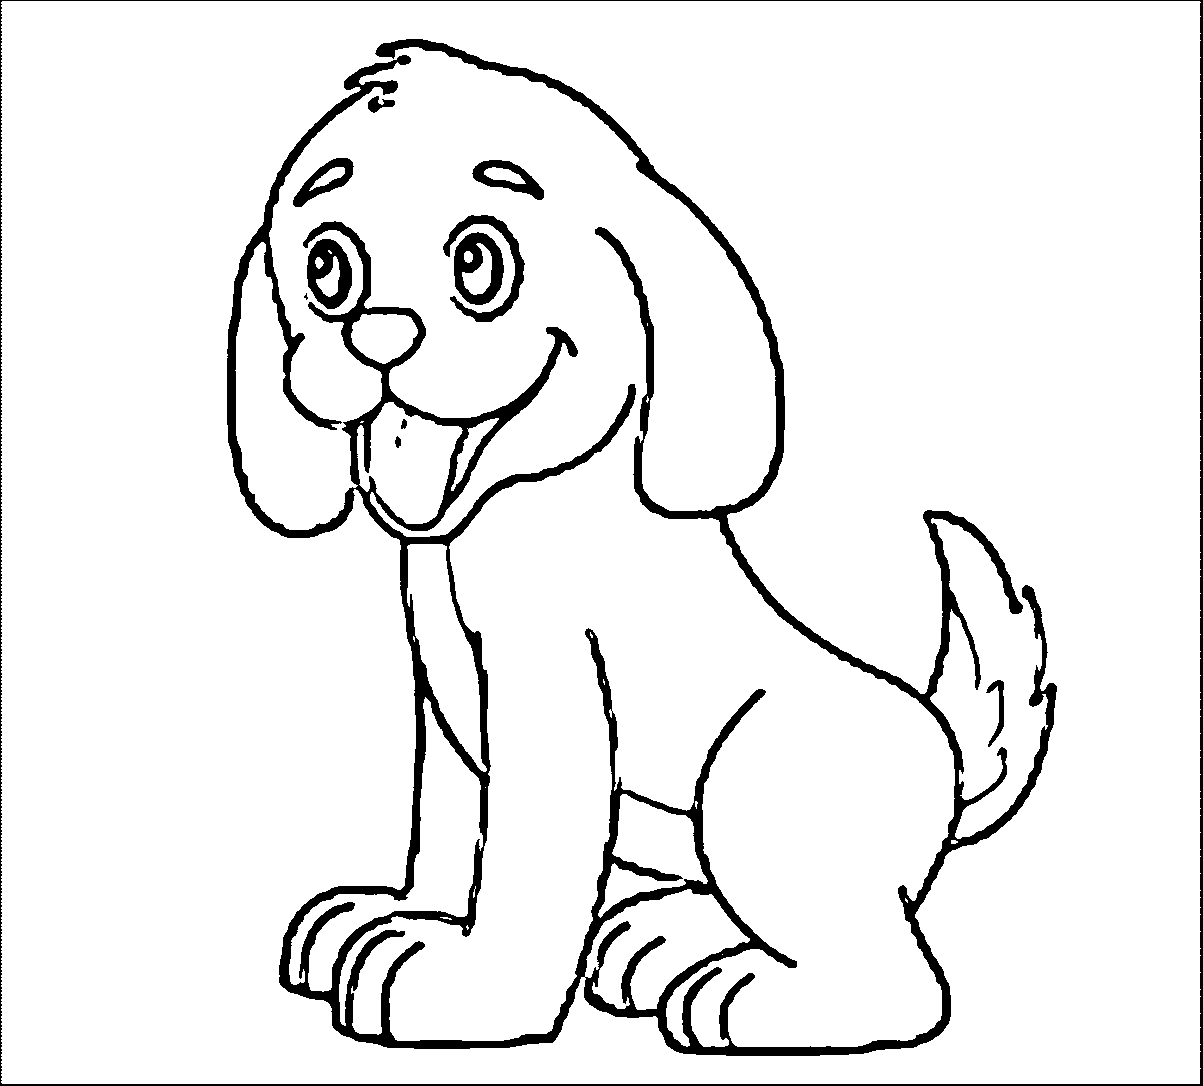 Download Puppy Outline Coloring Page - Coloring Home